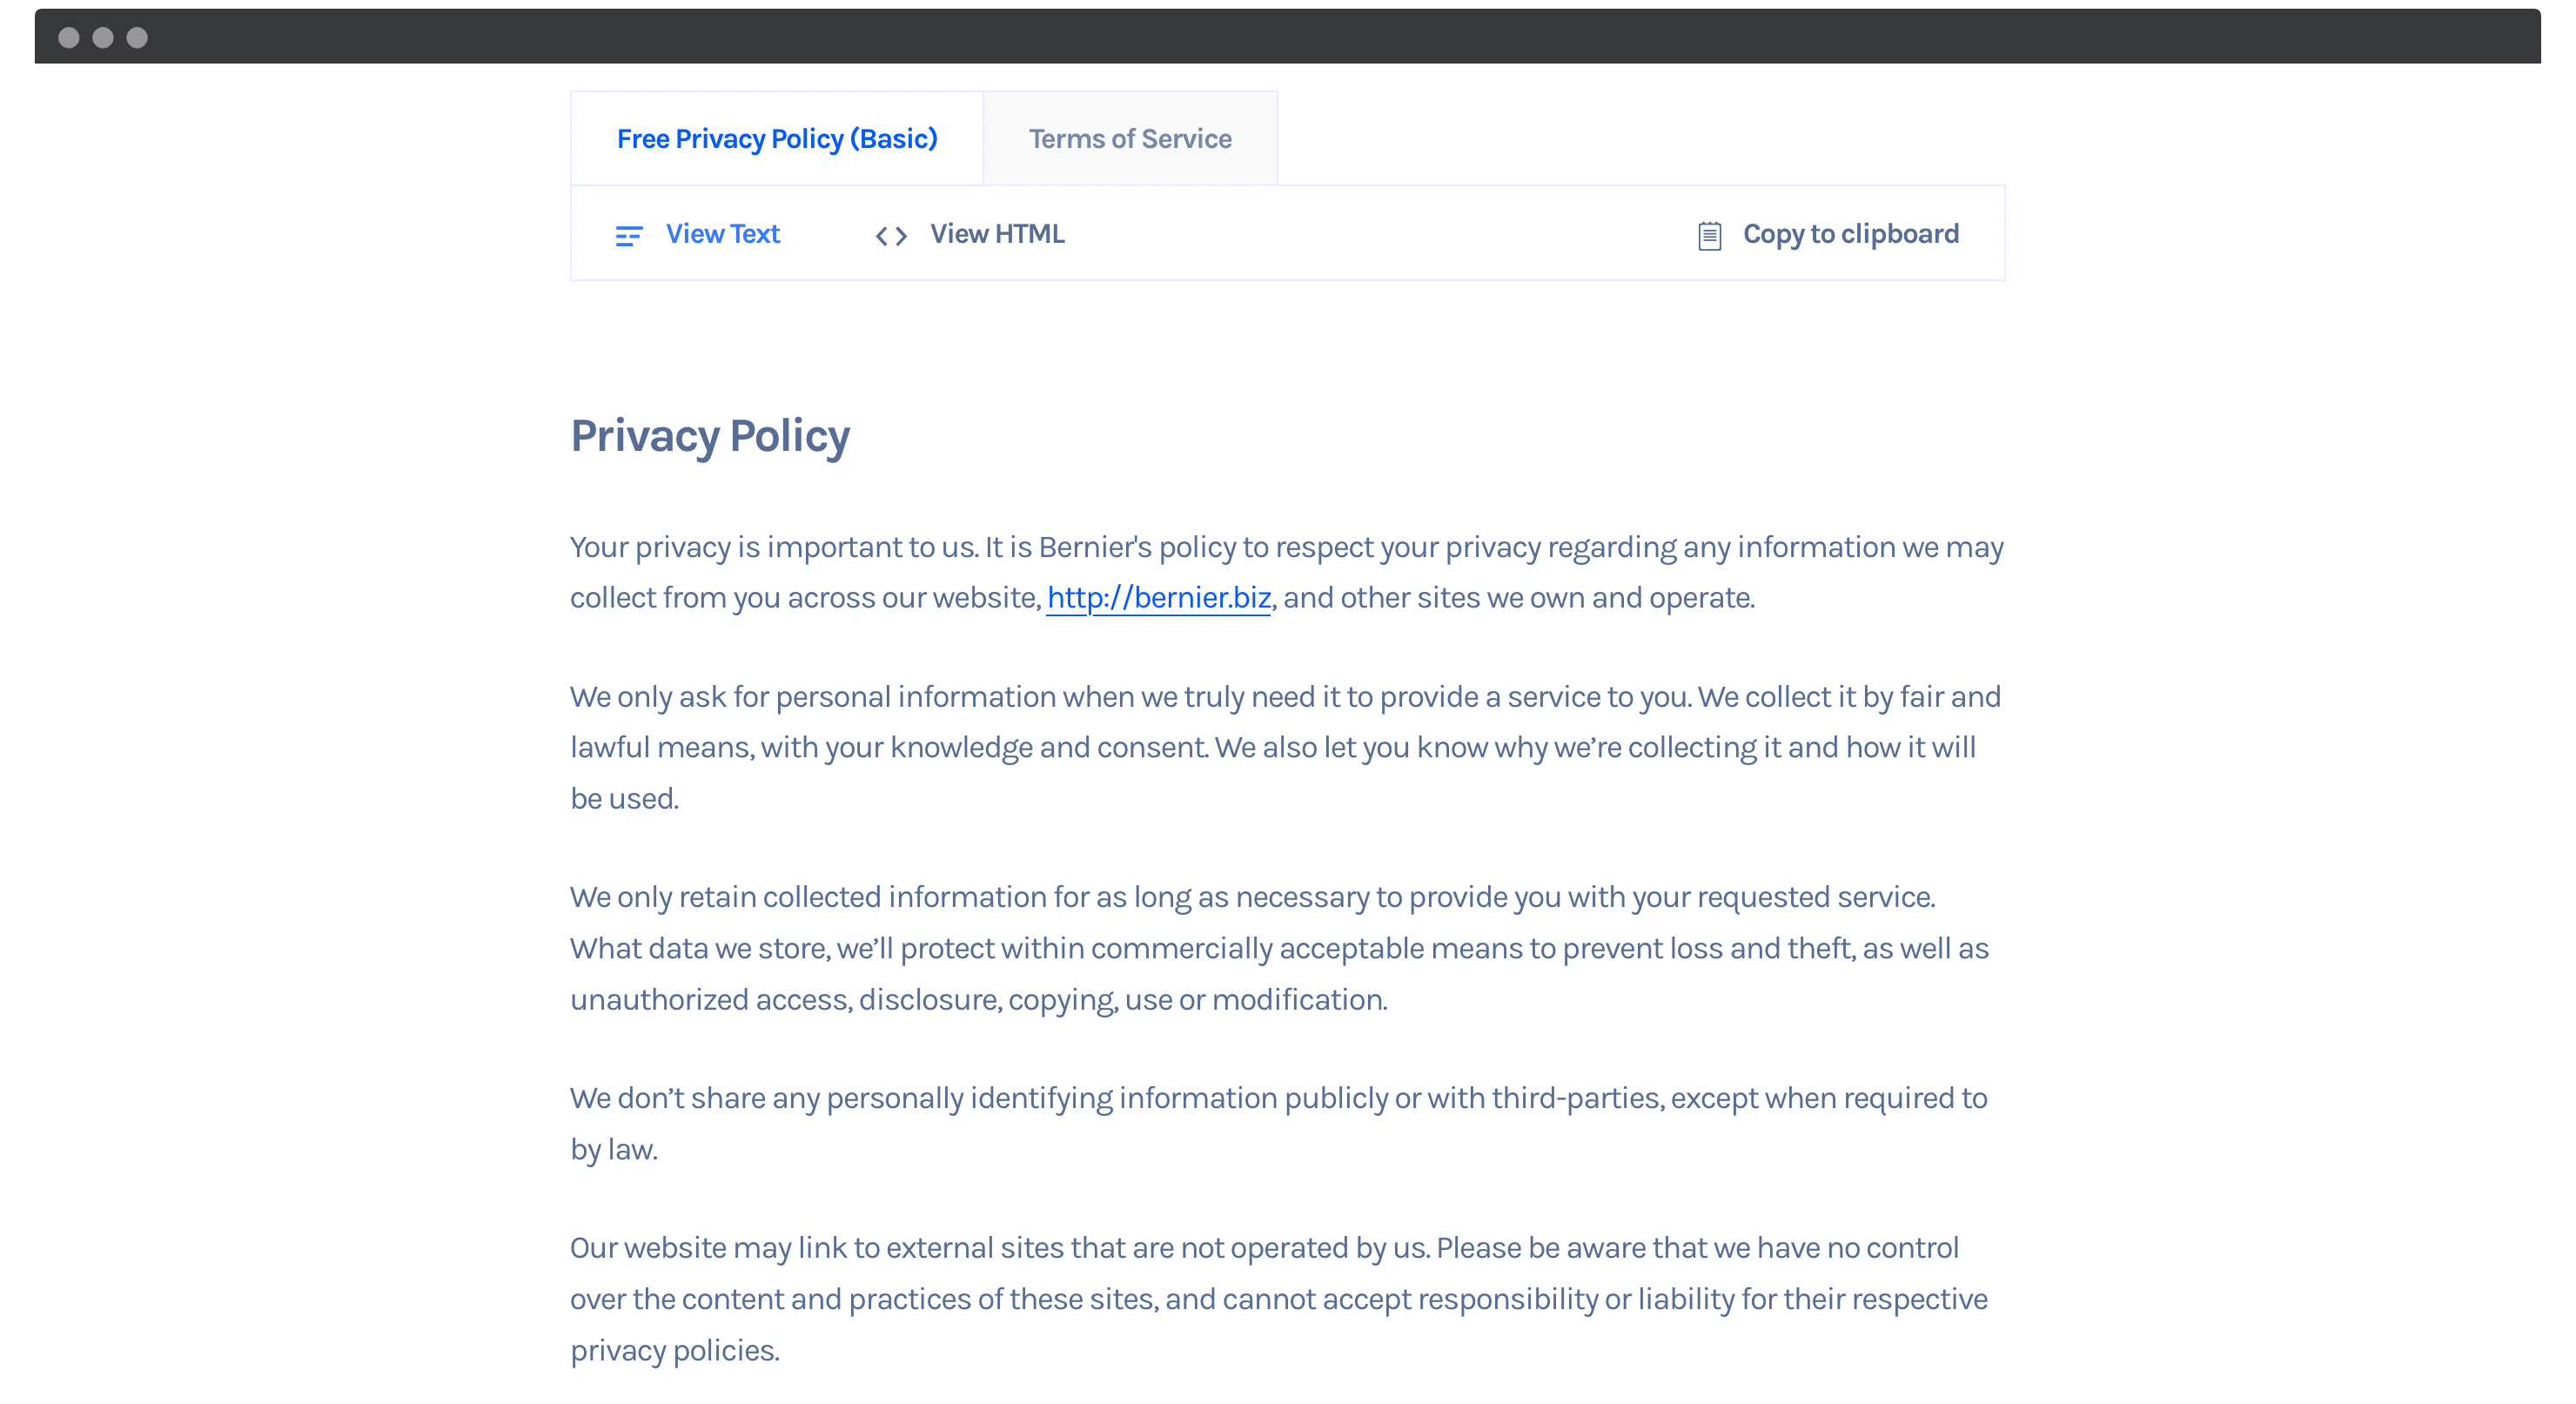 A generated Privacy Policy and Terms of Service.